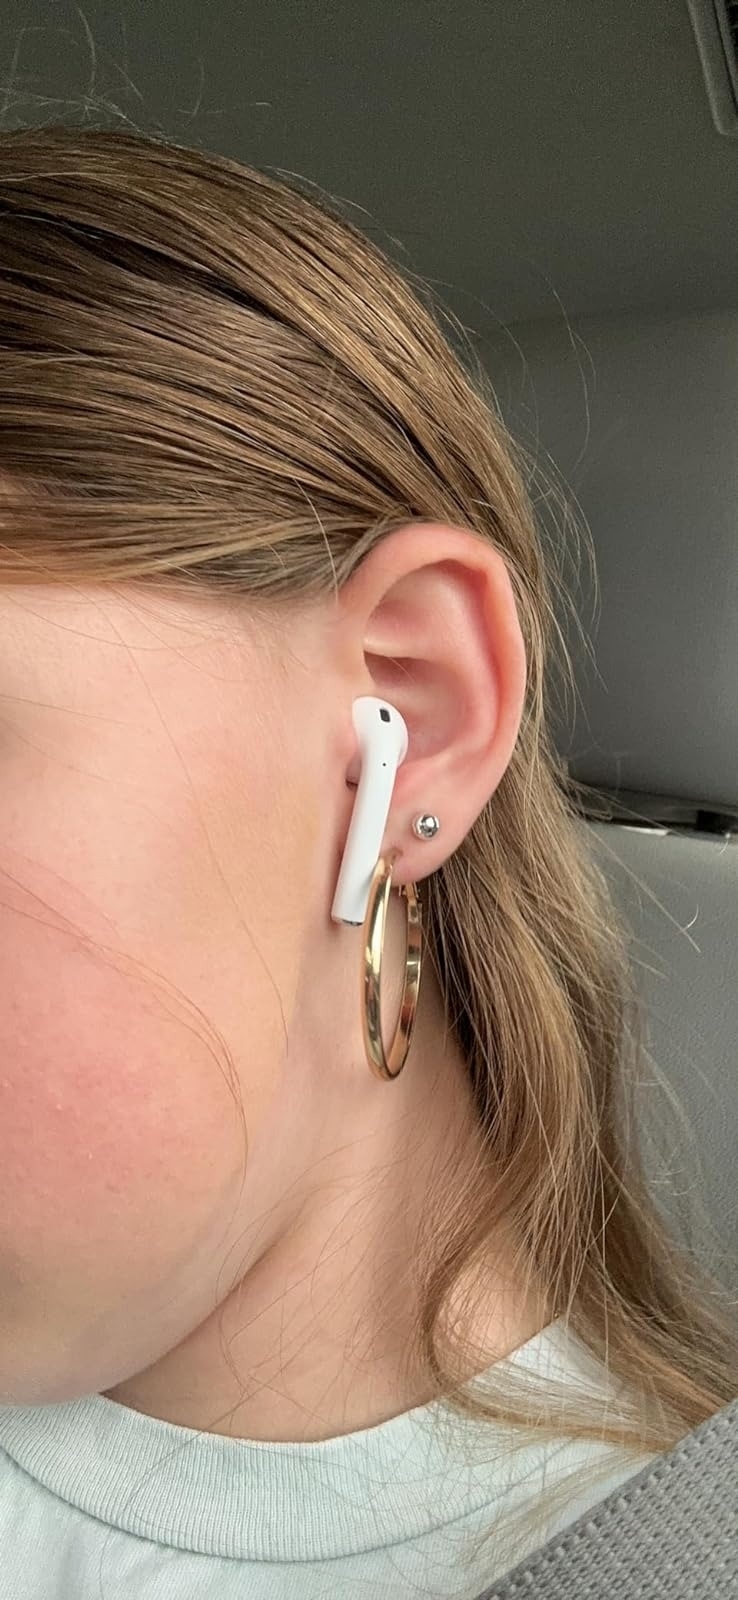 You Can Get A Pair Of Apple AirPods For Only $89 Right Now